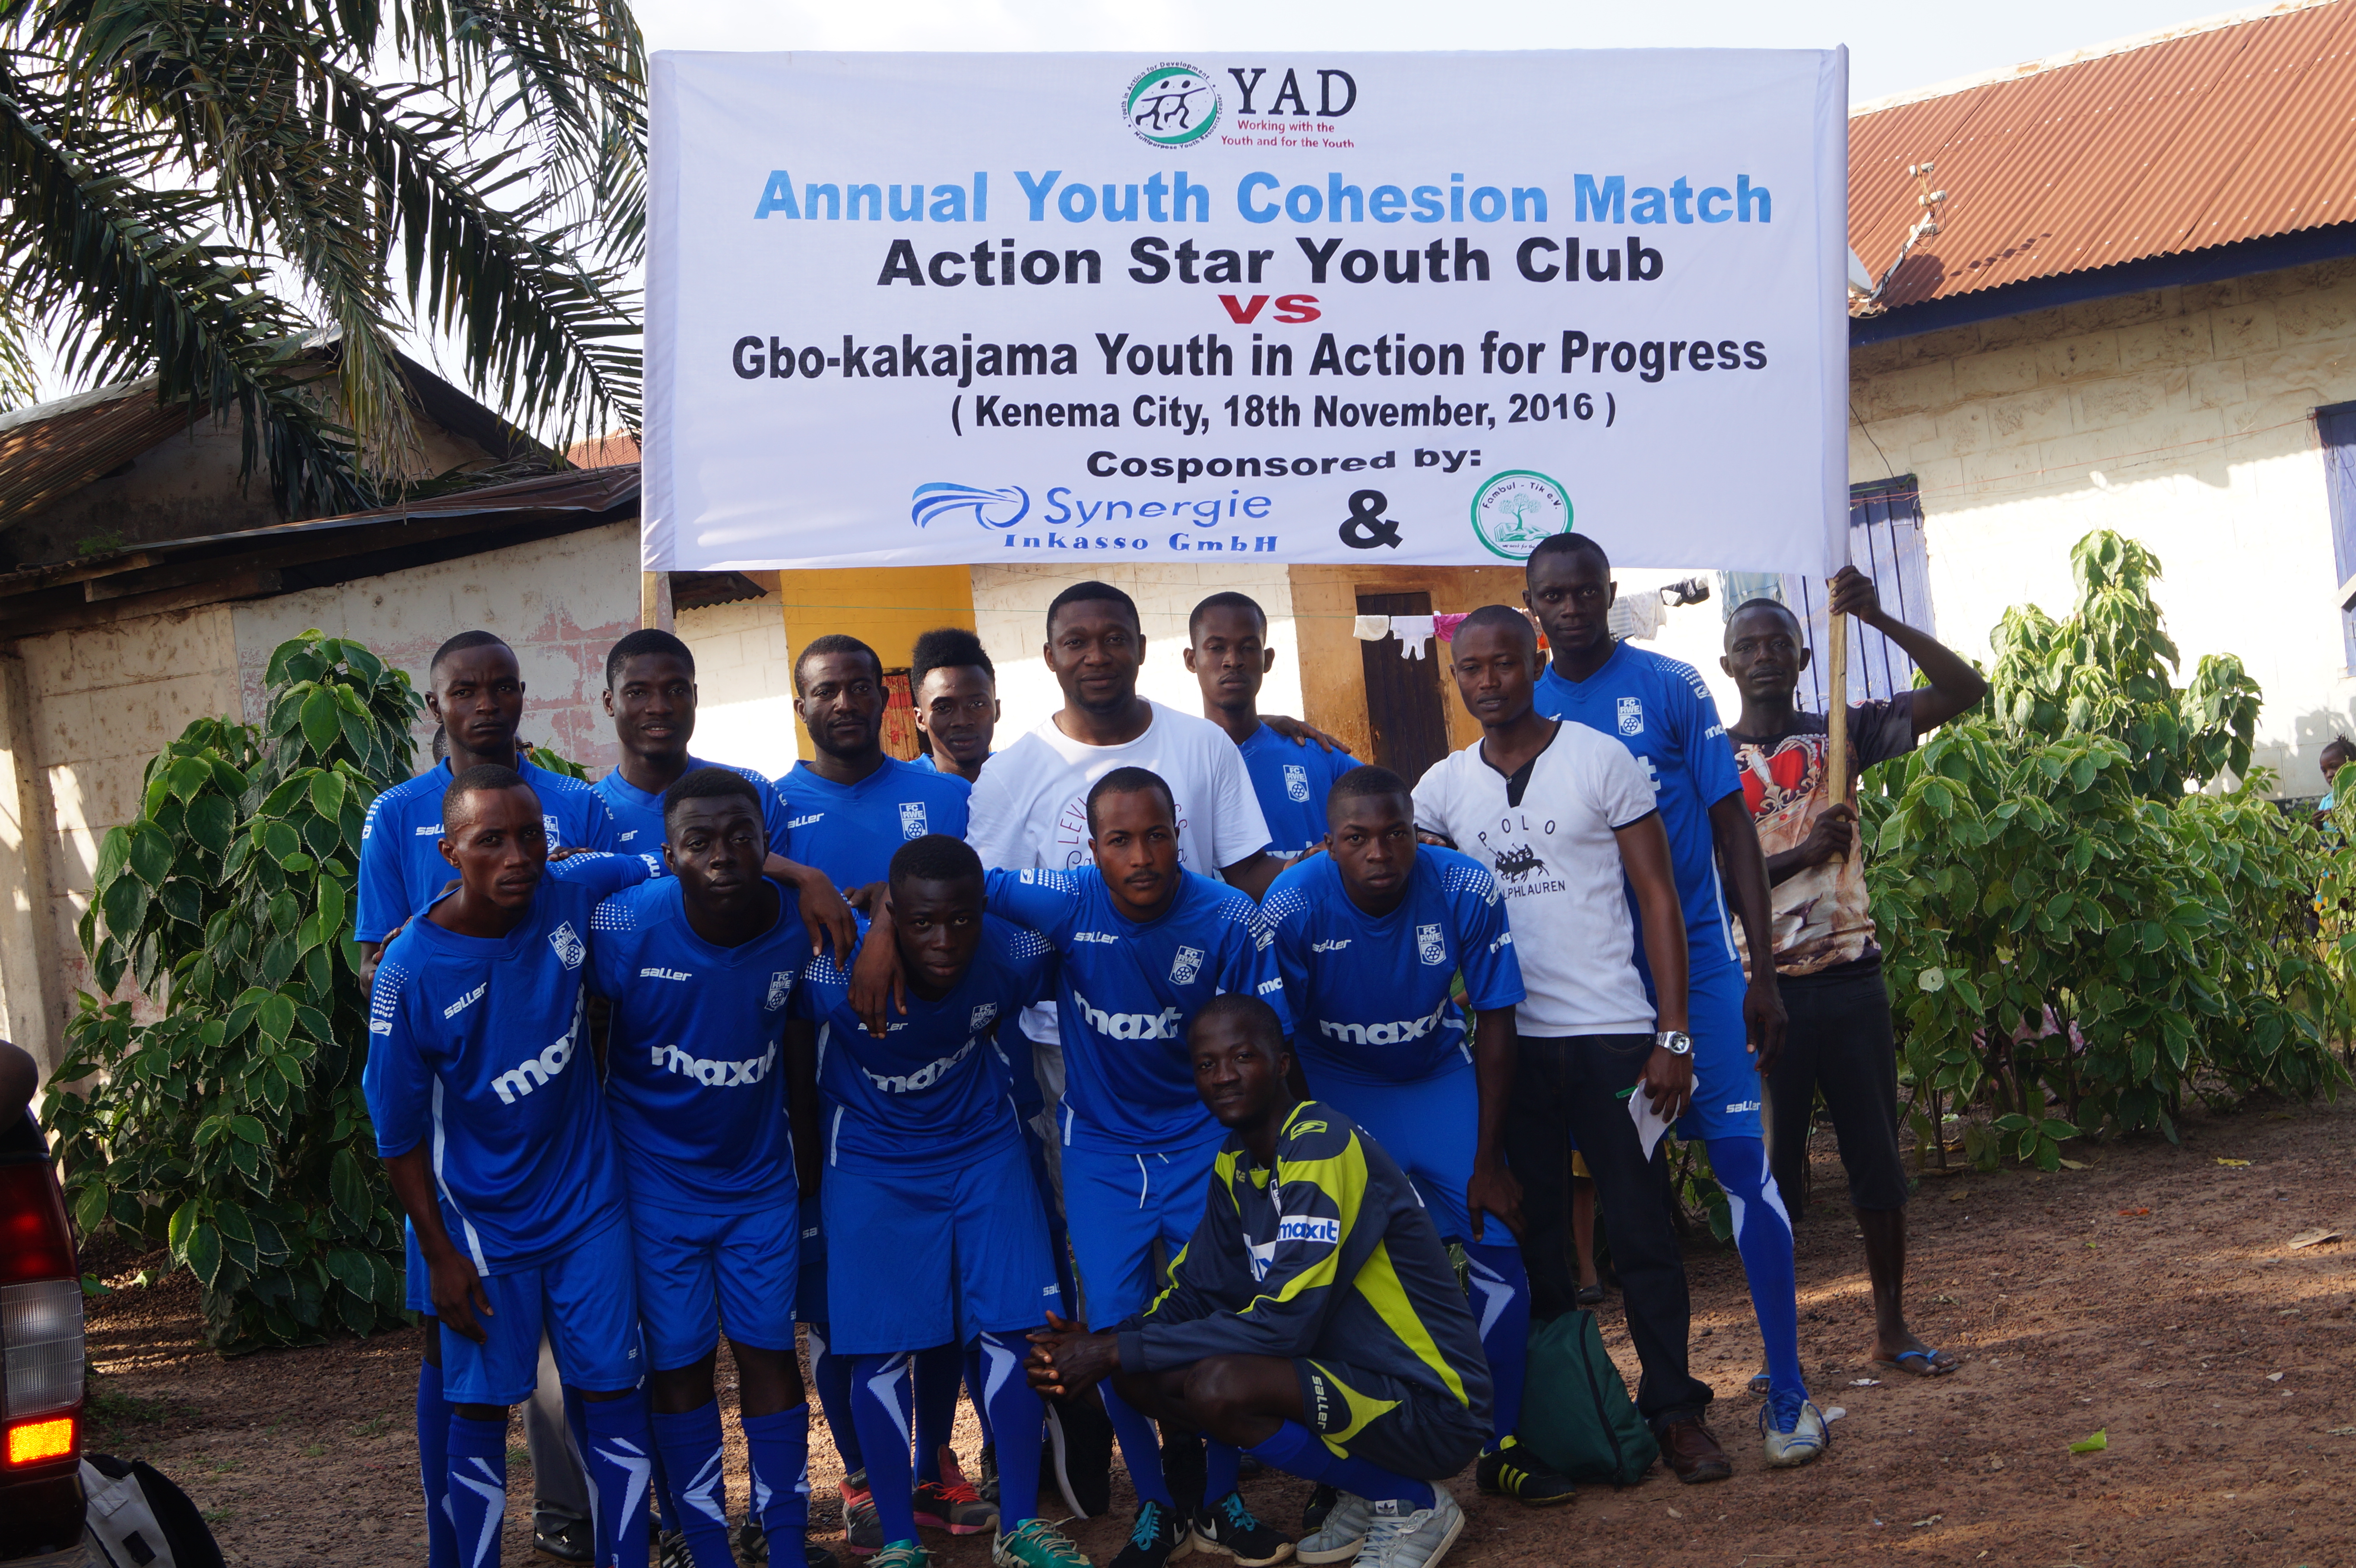 Gbo-kakajama Youth in Action for Progress (GYAP)